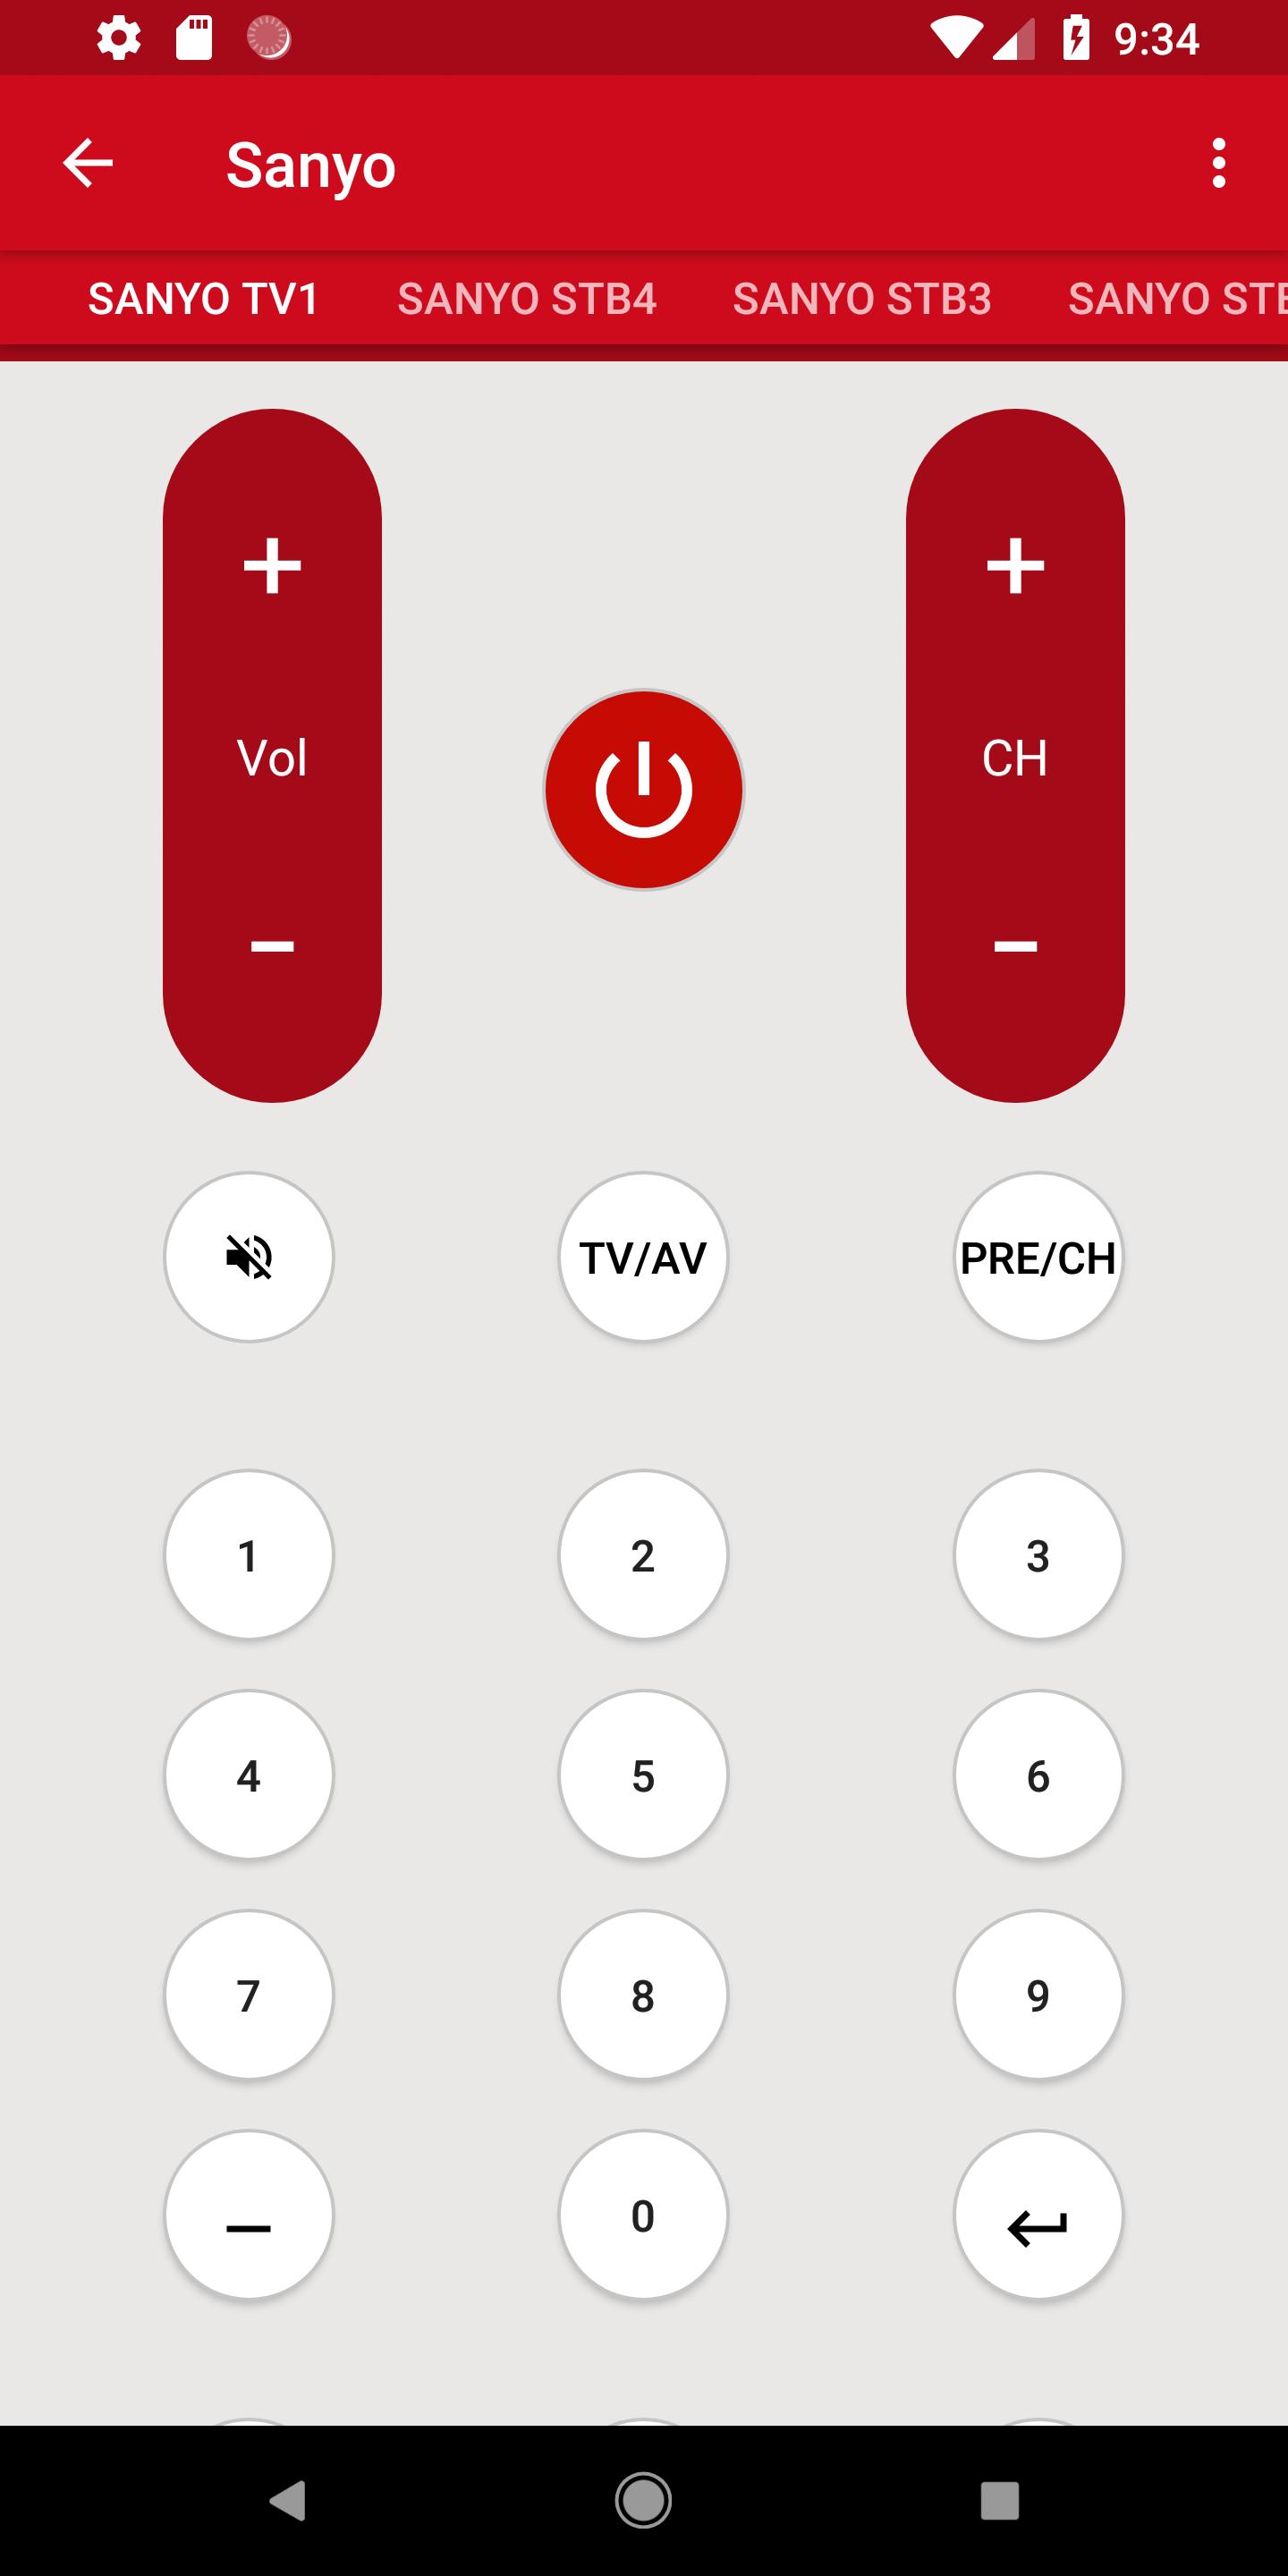 Sanyo DVD Player Remote for Android - APK Download